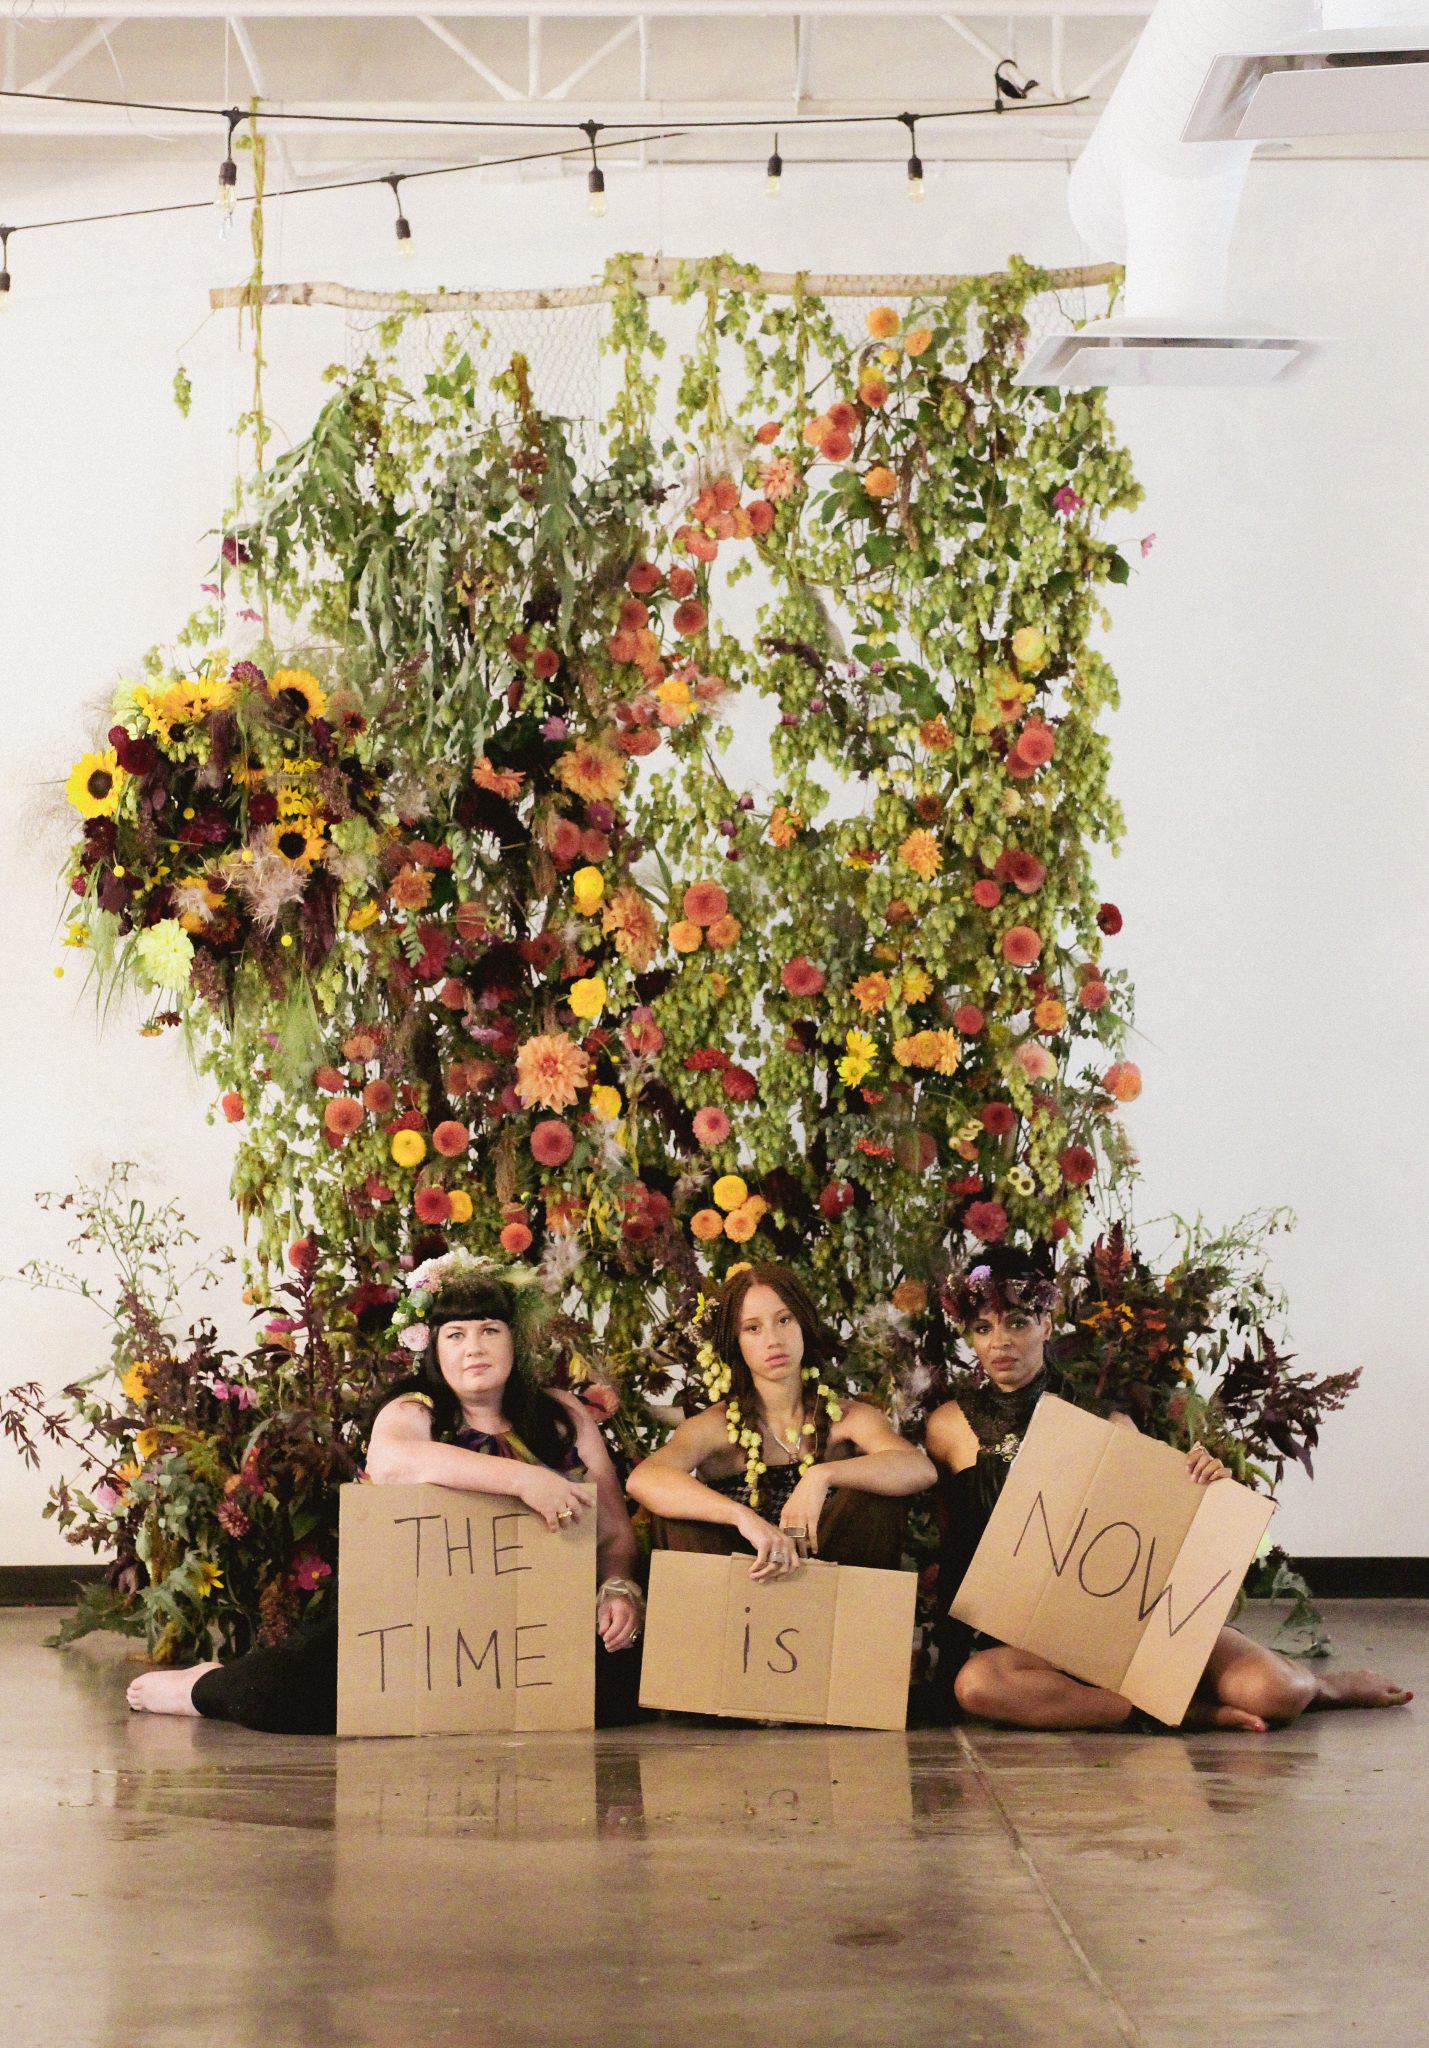 Three women holding cardboard signs that read 'The Time is Now' in front of a floral installation.